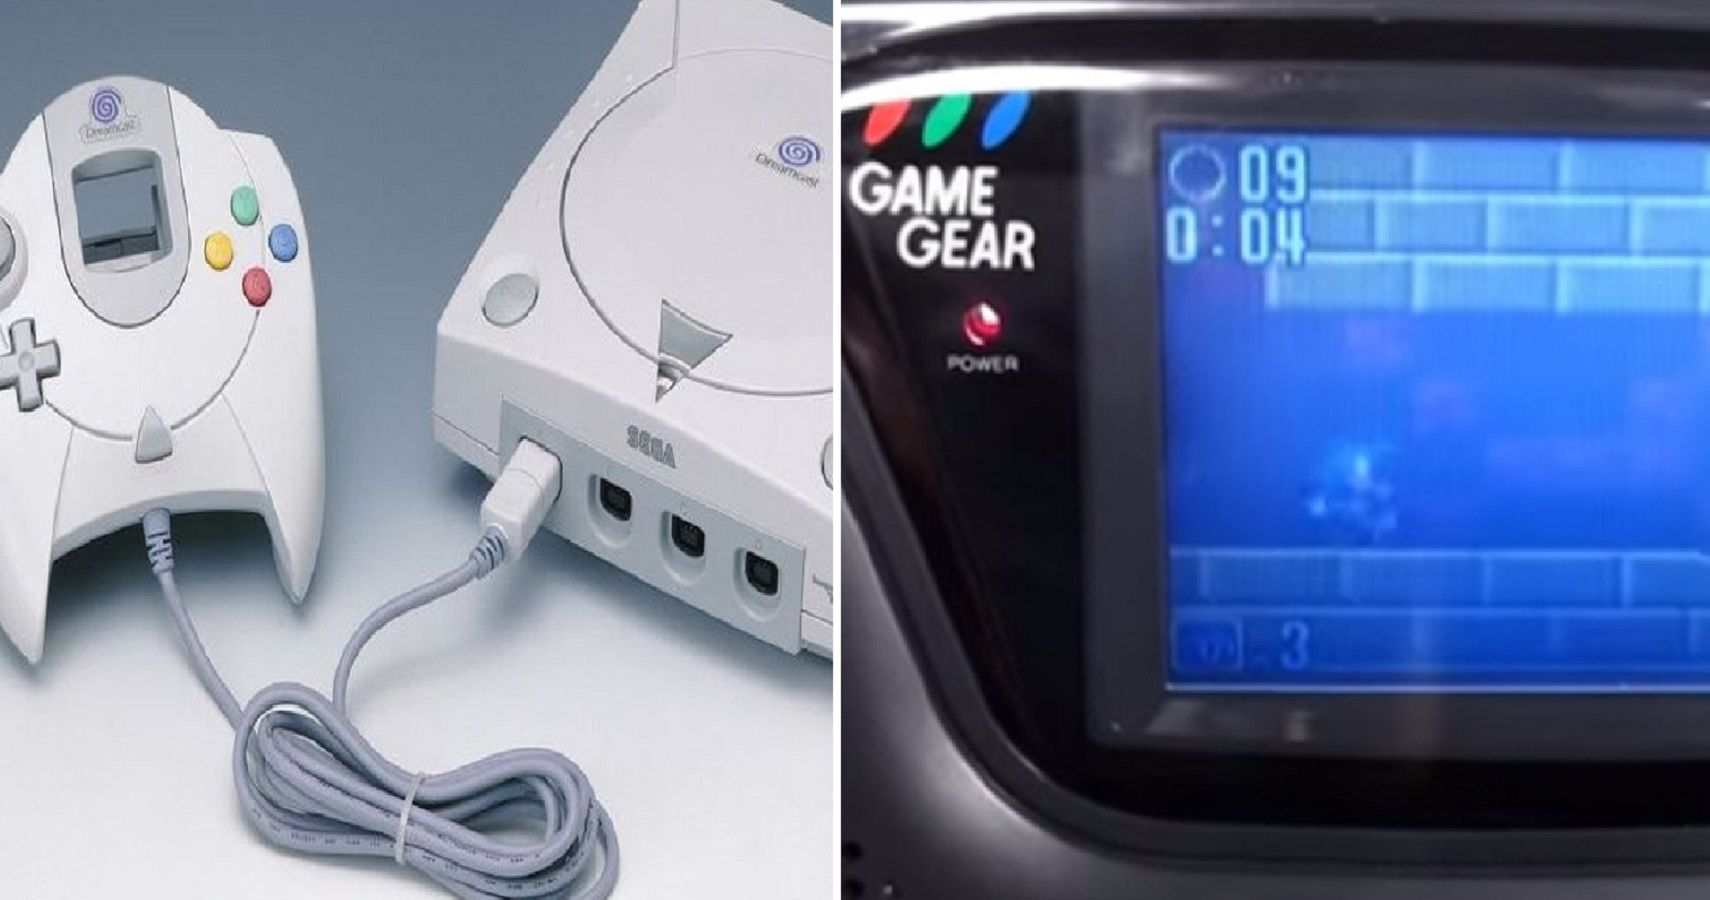 A split image of Sega's Dreamcast and Game Gear